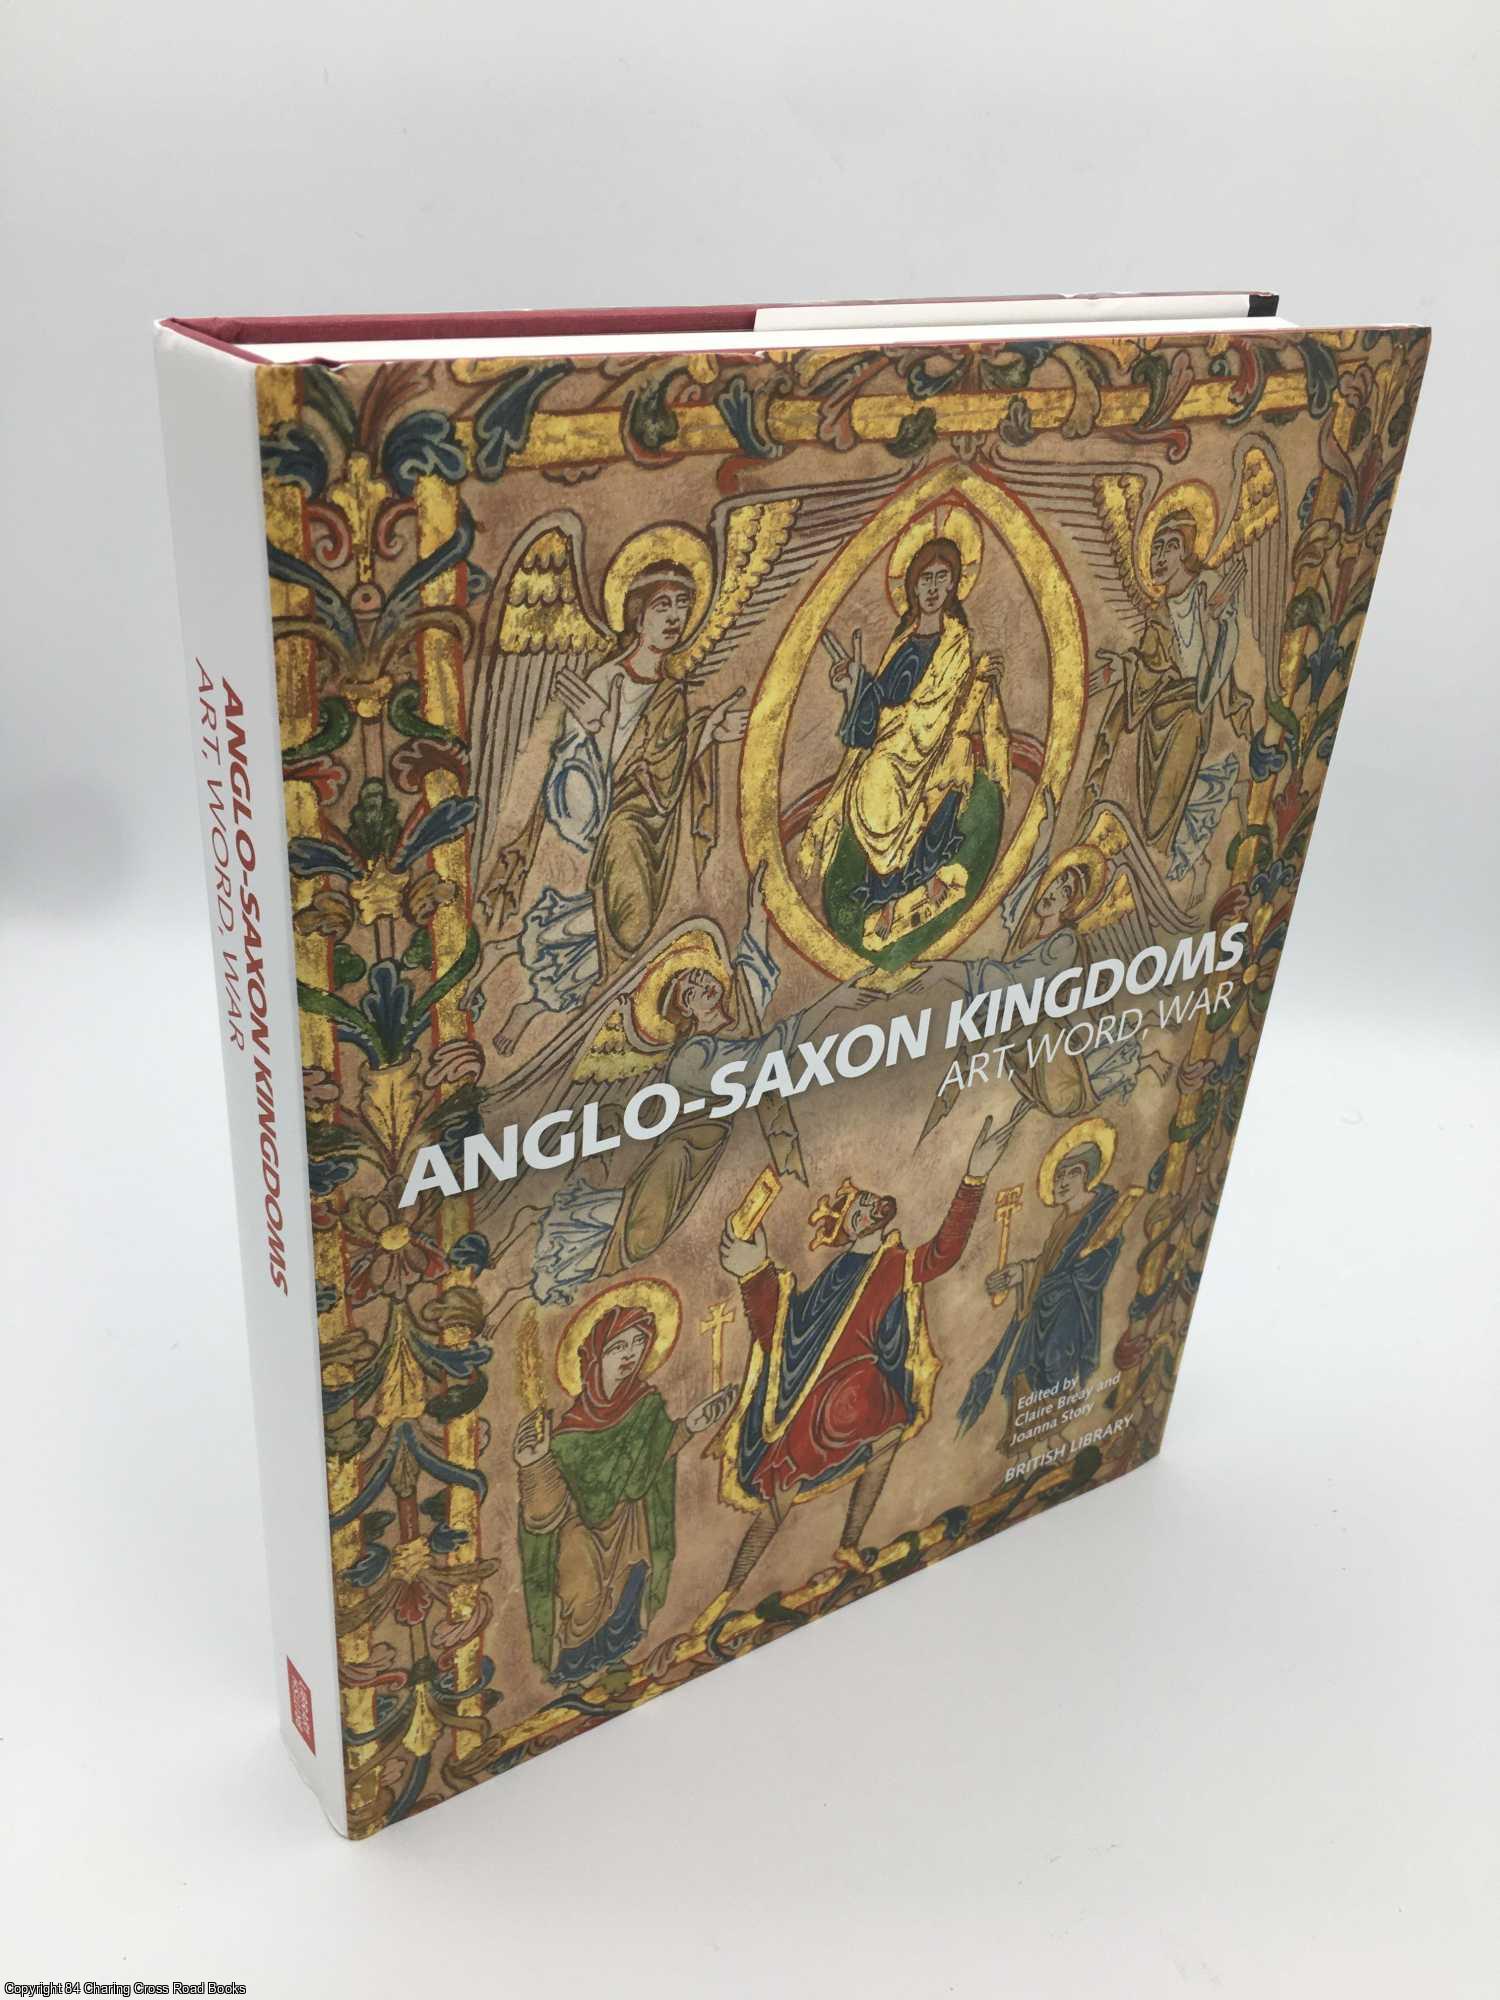 Breay, Claire - Anglo-Saxon Kingdoms: Art, Word, War